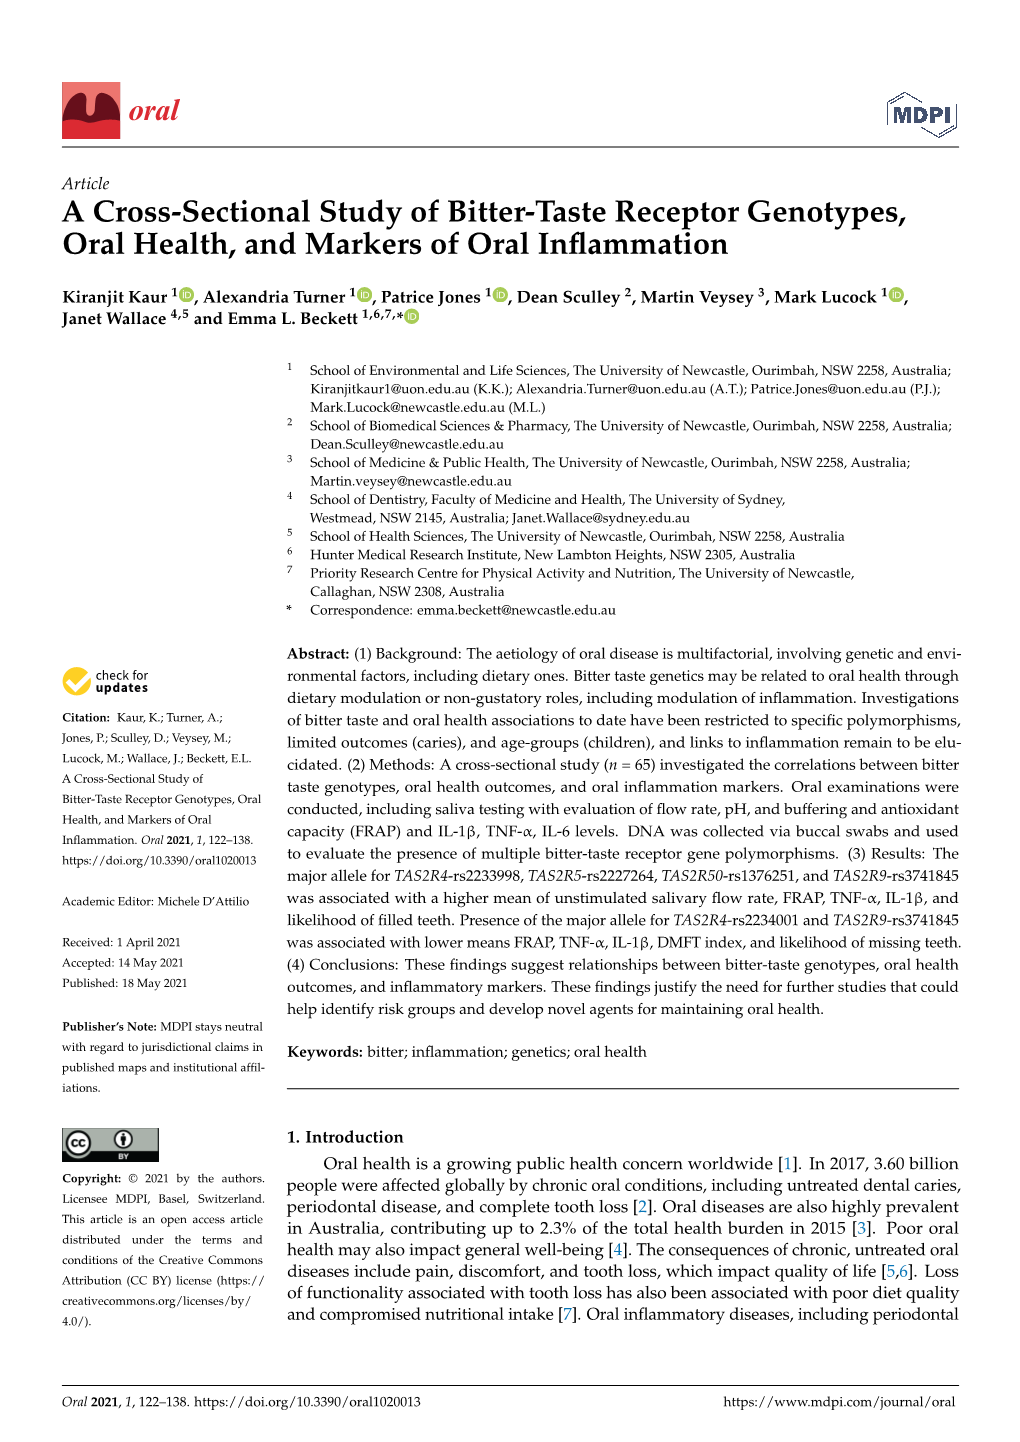 A Cross-Sectional Study of Bitter-Taste Receptor Genotypes, Oral Health, and Markers of Oral Inflammation